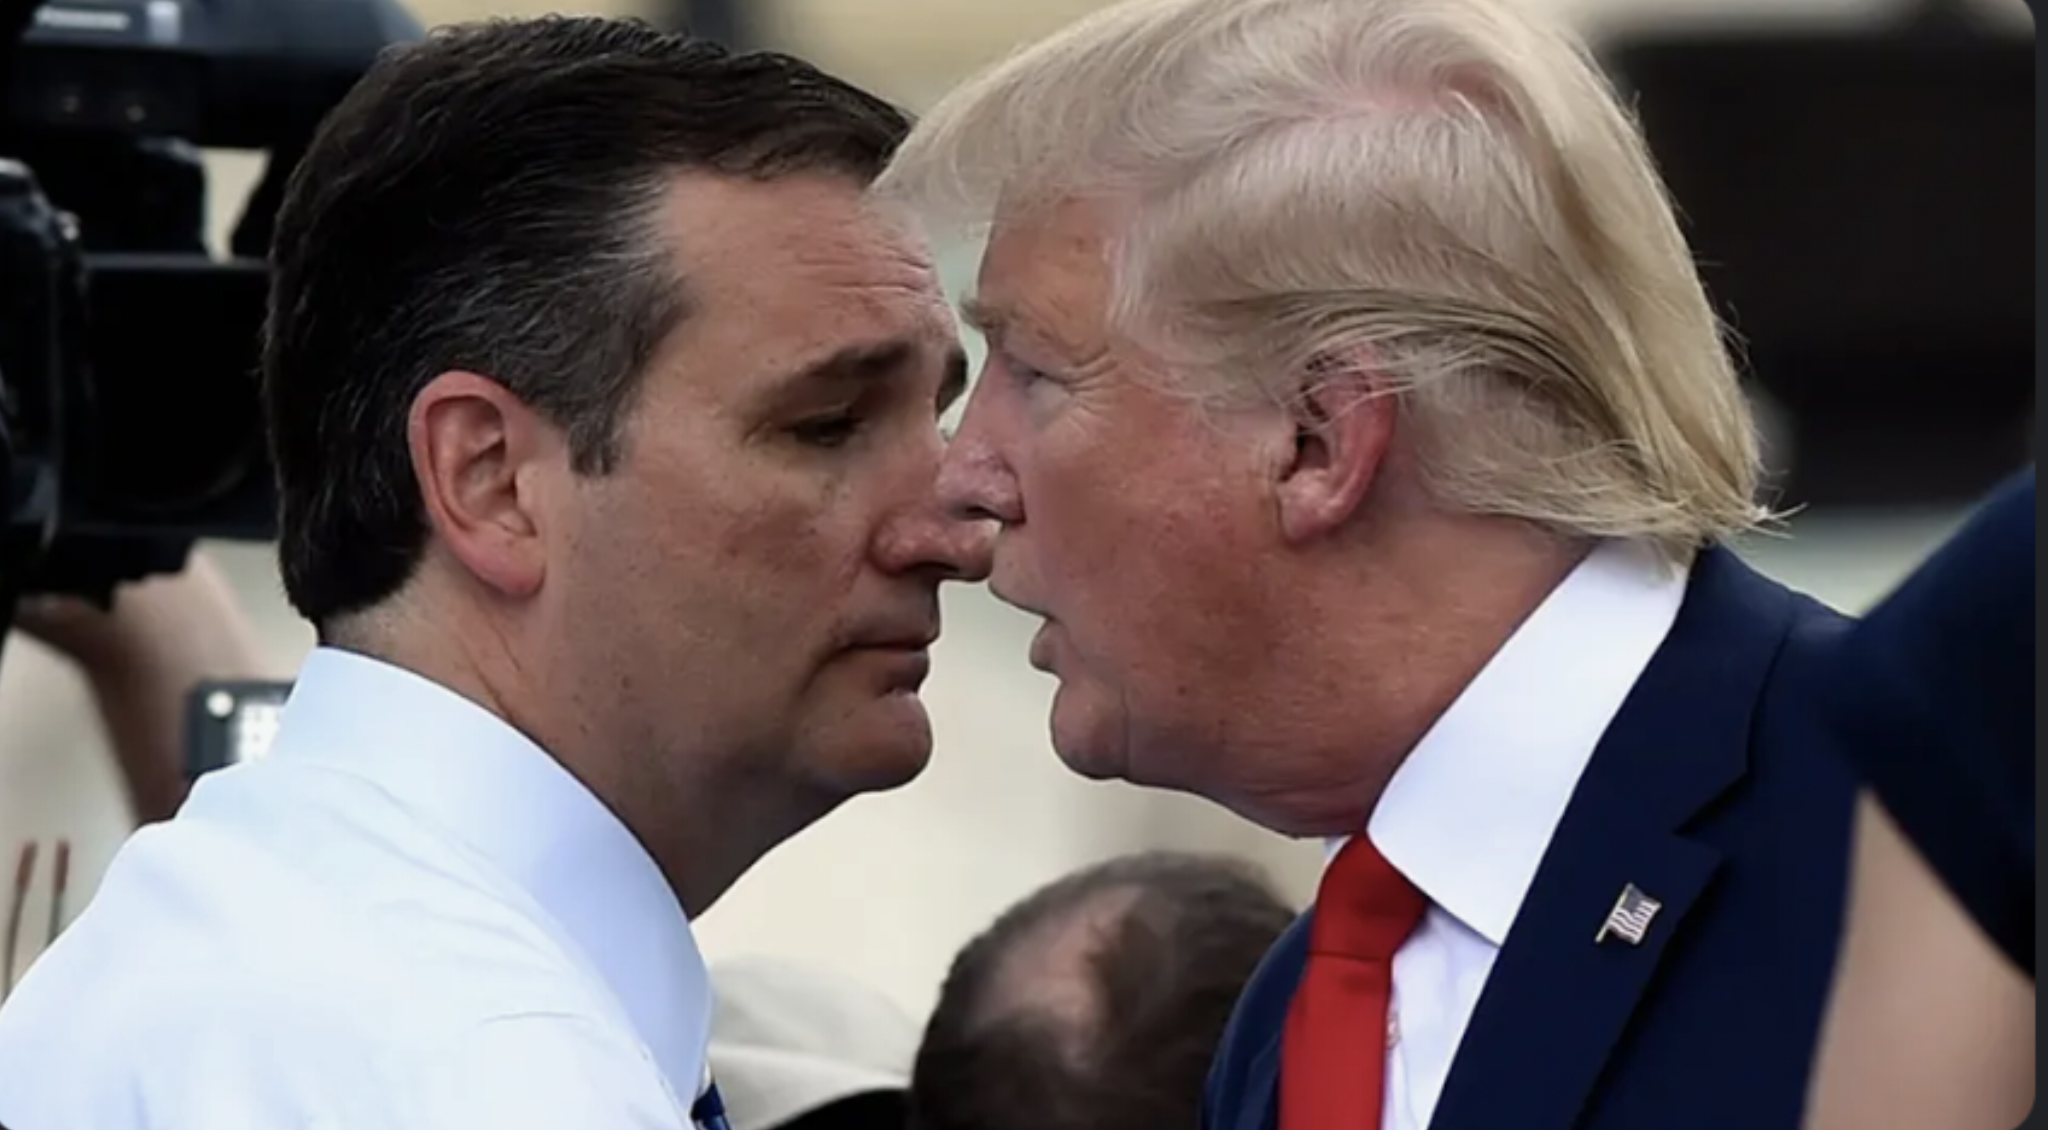 May 17th, 2004 Mr. Ted Cruz and Mr. Donald J Trump tie the knot in the first legal same-sex marriage.